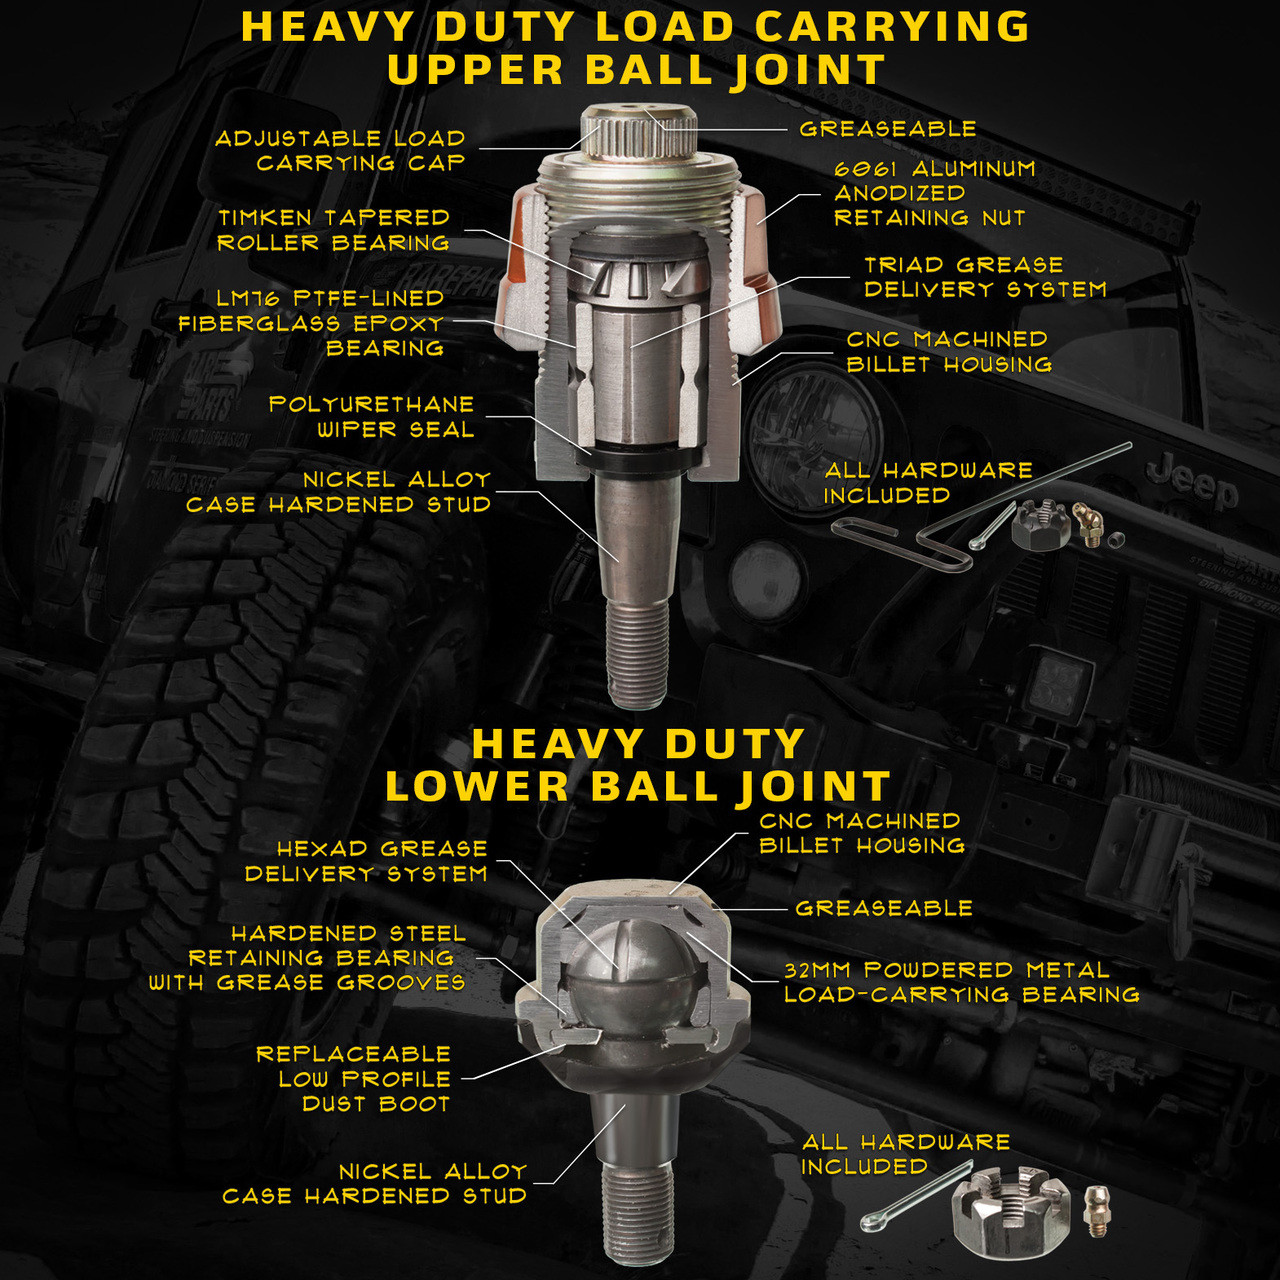 Rare Parts High Performance Dual Load Carrying Ball Joints (Wrangler JK 2007-2018)